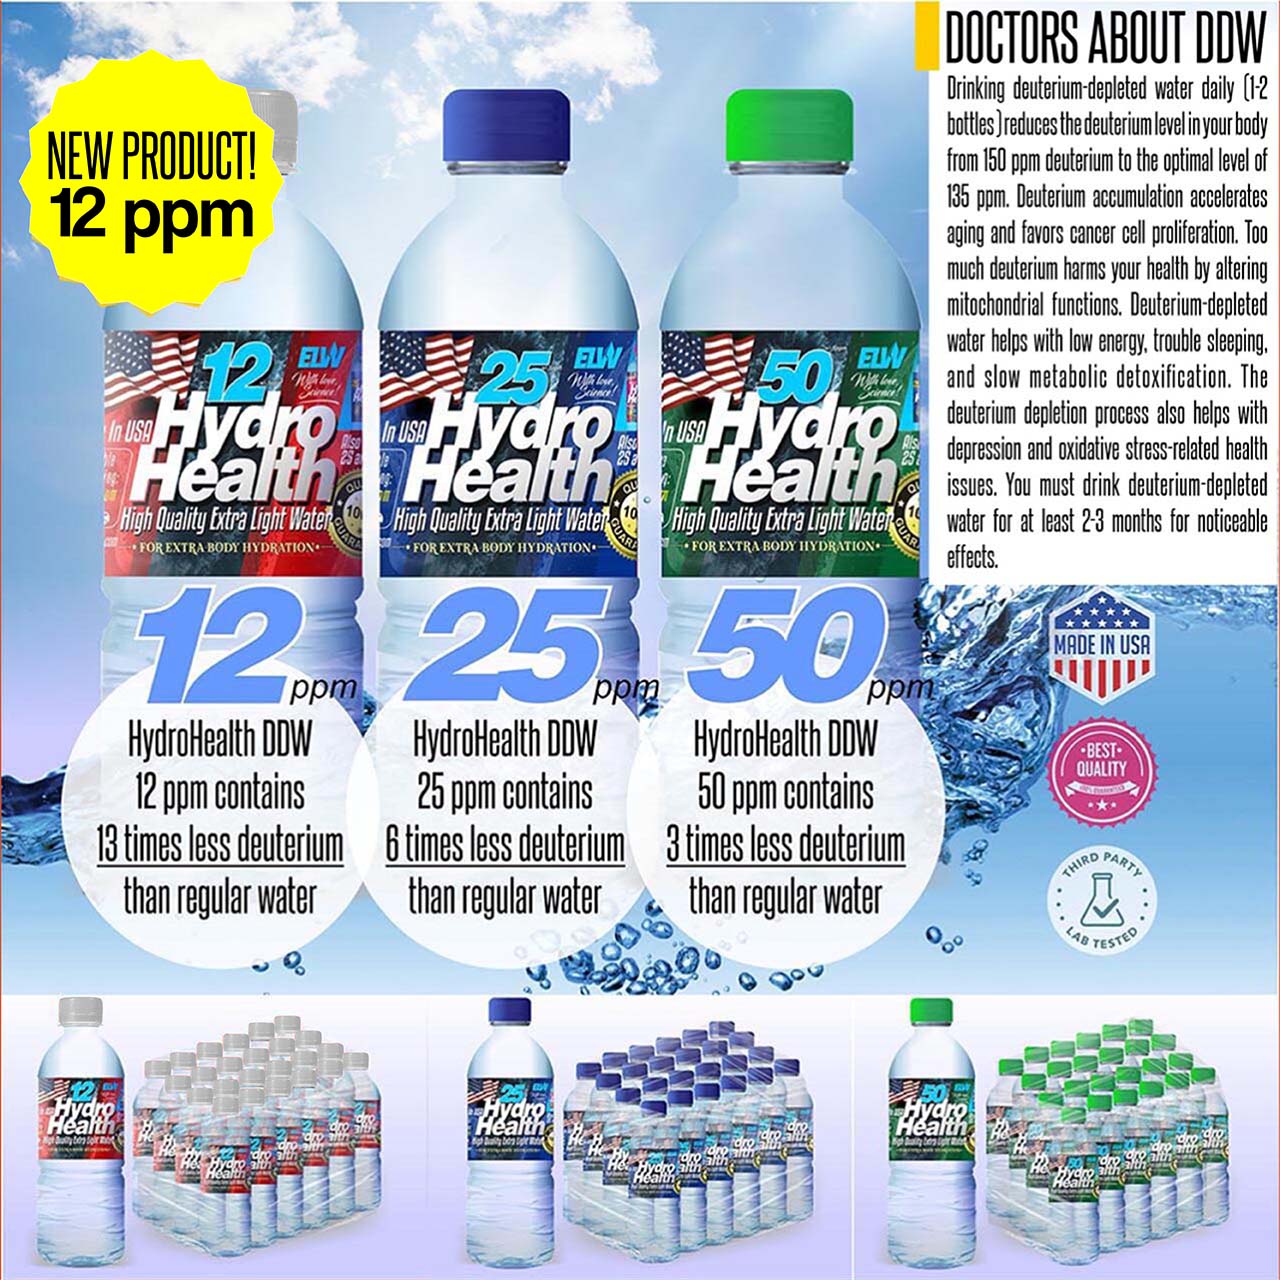 12 ppm Hydro-Health-Promo Price: ONLY $255 for one case of 24 bottles (EACH costs $10.62 delivered) - x 500 ML =12 LITERS - including S&H; t is cheaper compared to 10 ppm DDW , $14-$16 per 500 ML that other vendors sell from Russia